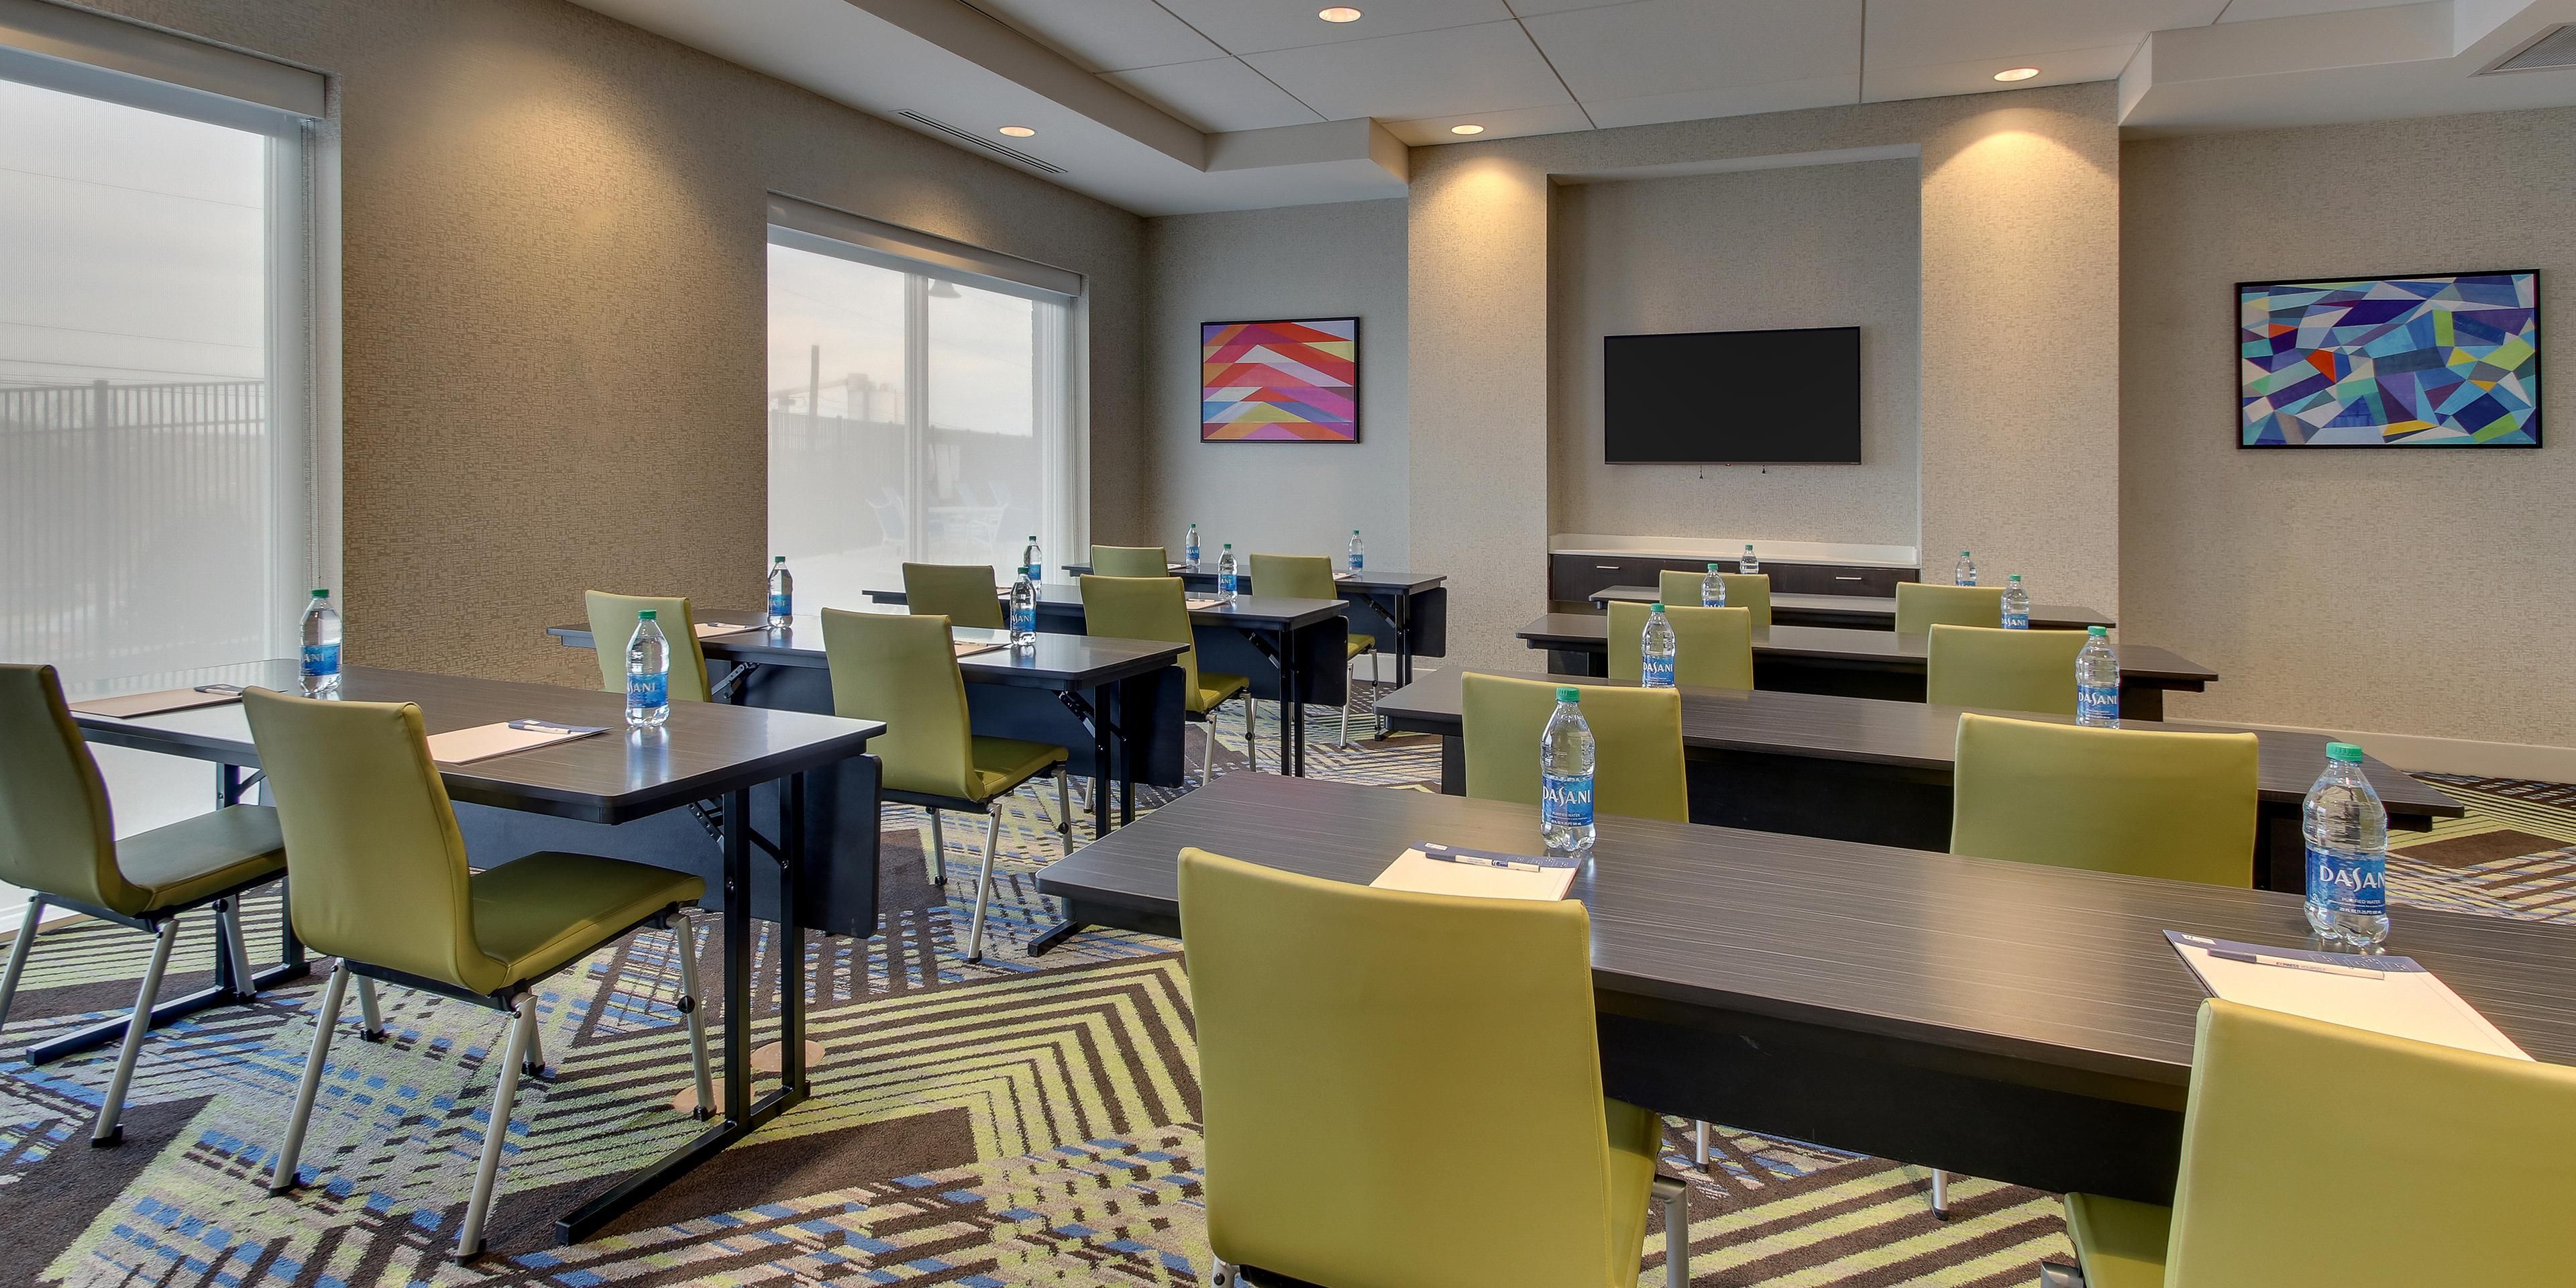 Let the Holiday Inn Express & Suites Nashville MetroCenter Downtown be the place your next meeting occurs. Our Sales team can assist you with all your meeting needs. Click on the link for additional information to get the process started.